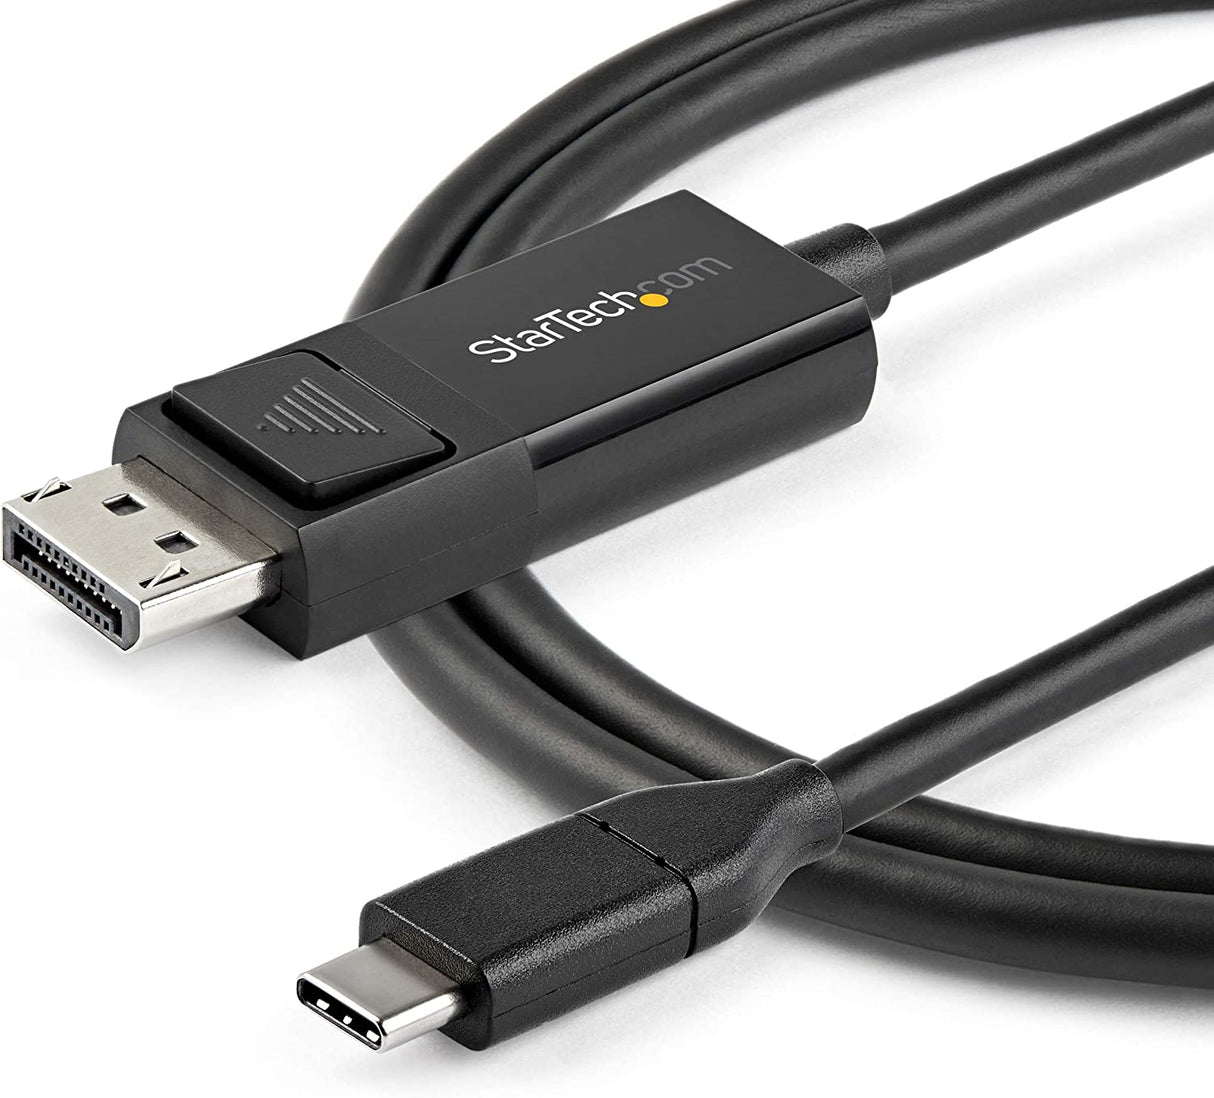 StarTech.com 3.3ft (1m) USB C to DisplayPort 1.2 Cable 4K 60Hz - Bidirectional DP to USB-C or USB-C to DP Reversible Video Adapter Cable - HBR2/HDR - USB Type C/TB3 Monitor Cable (CDP2DP1MBD) 3 ft / 1 m